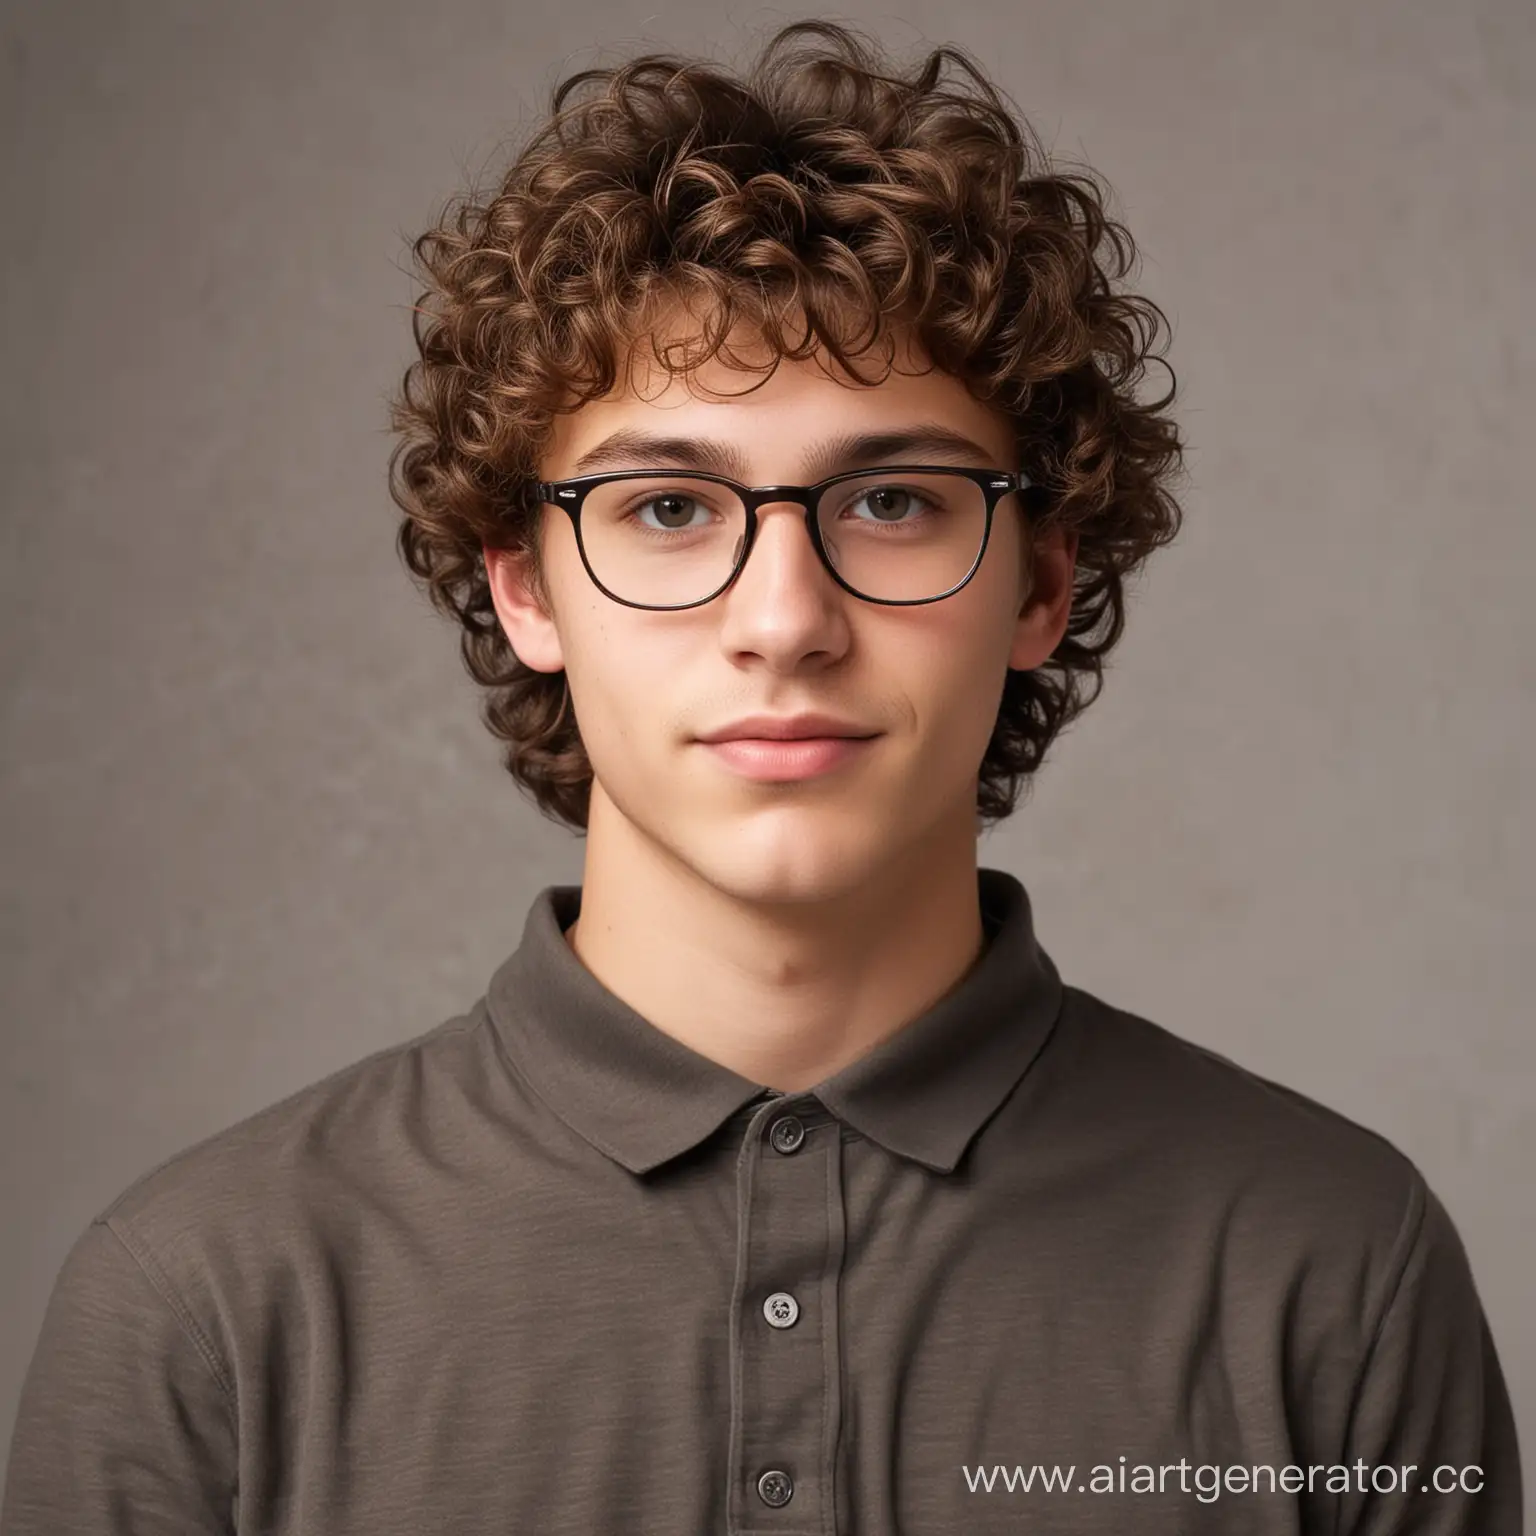 Portrait-of-CurlyHaired-Teenage-Boy-with-Glasses